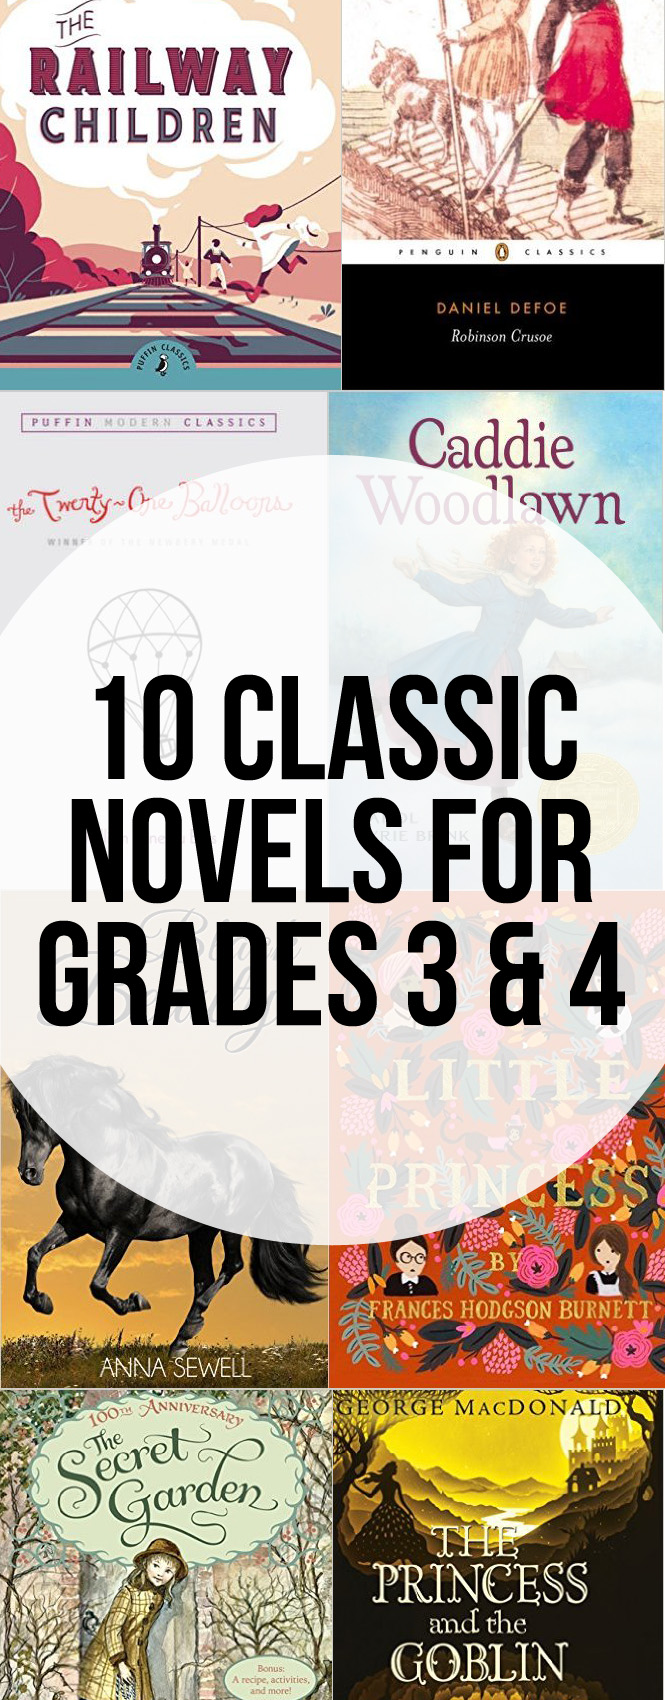 Classic books to read aloud with grade 3 and 4. They are truly classic novels the whole family will love.